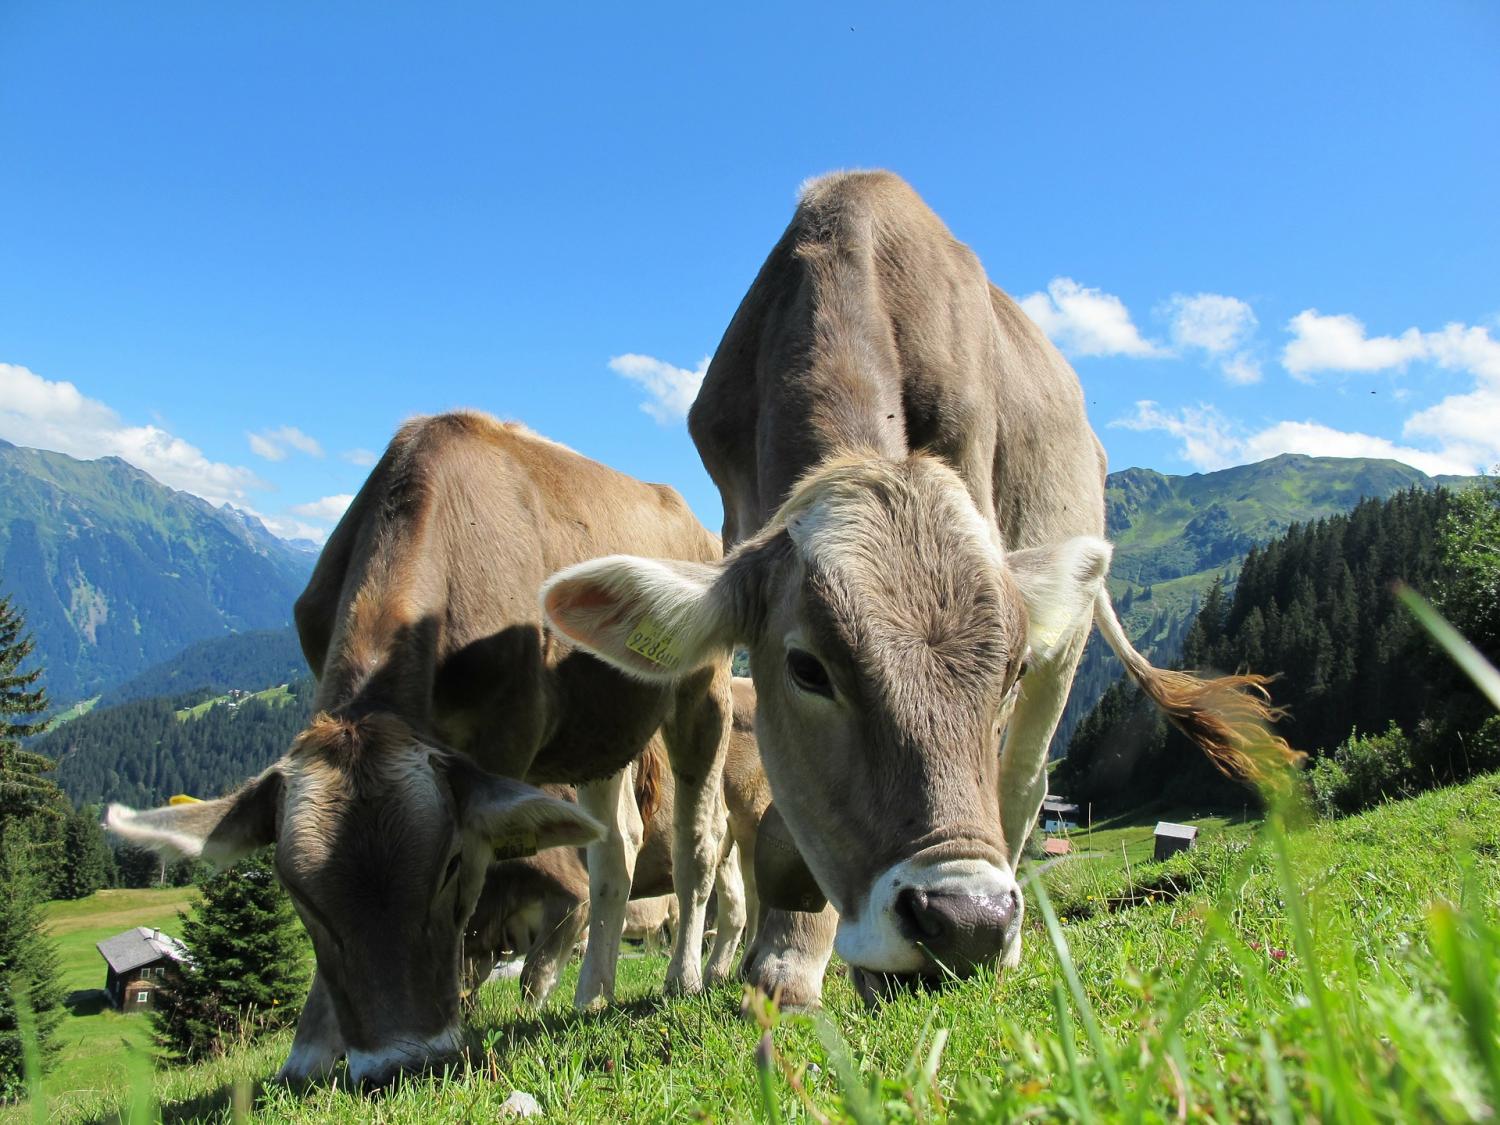 Meat and dairy companies slow to commit to net-zero emissions, new analysis finds